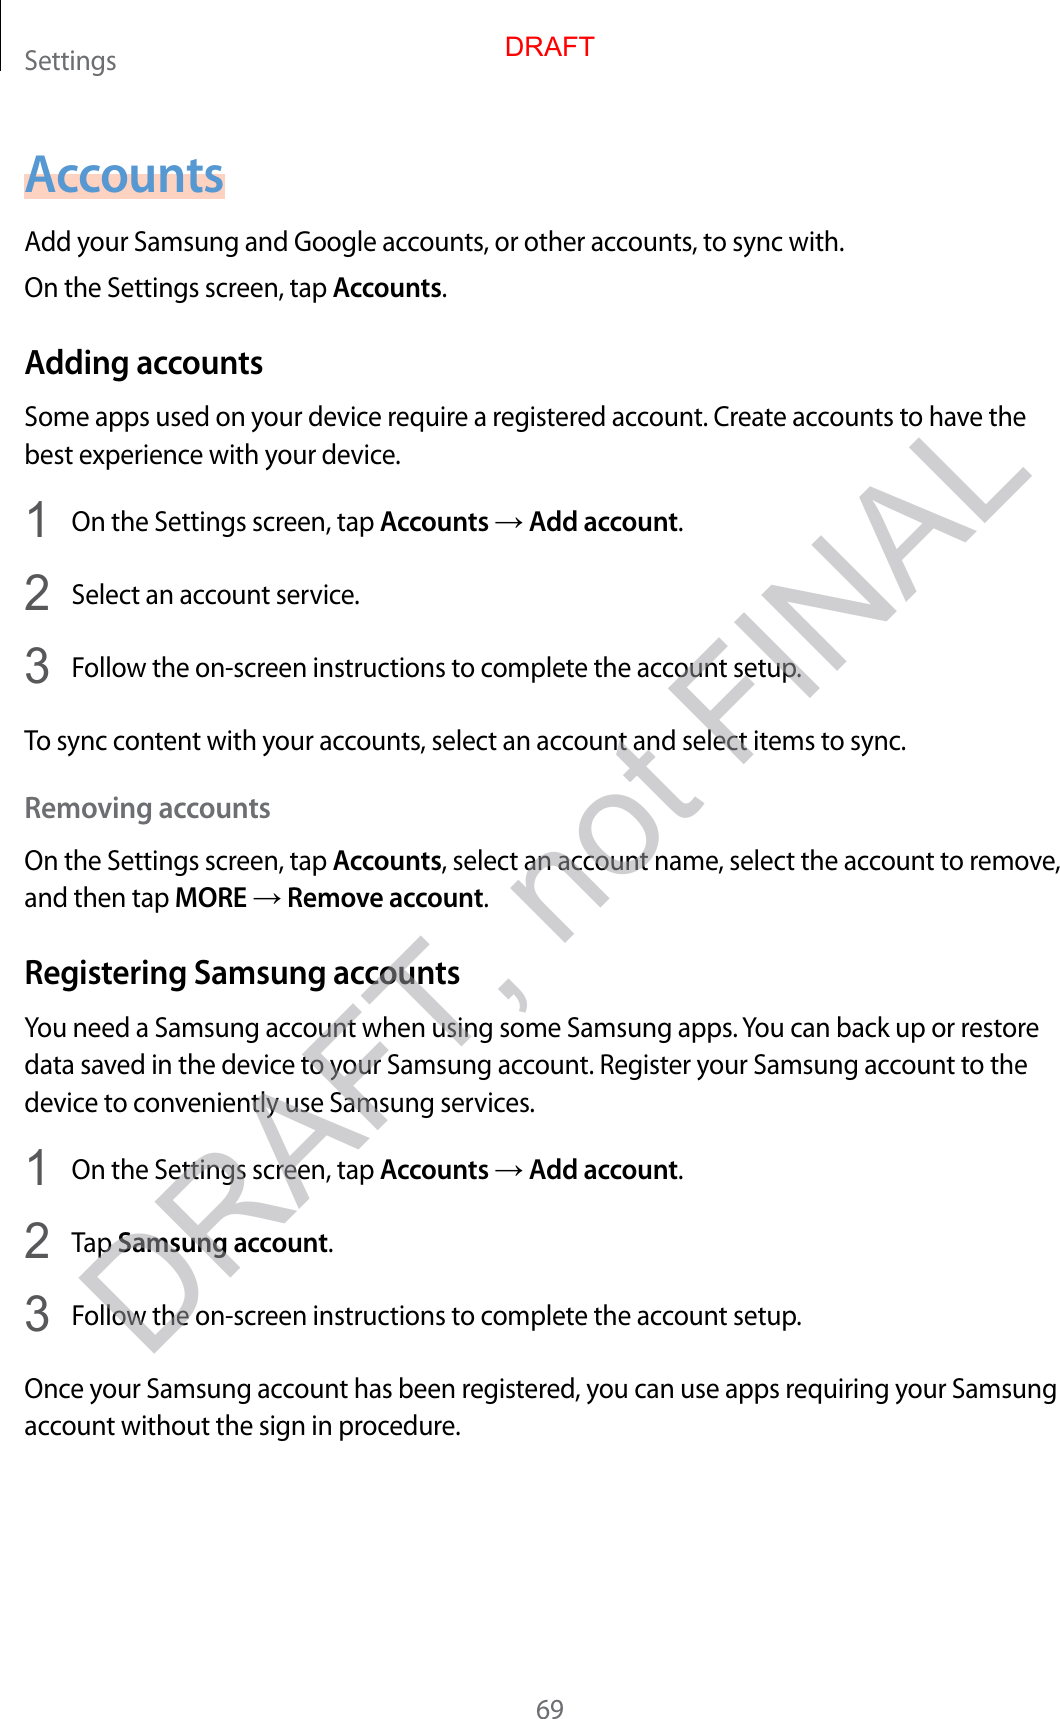 Settings69AccountsAdd y our Samsung and Google accoun ts , or other acc ounts, to sync with.On the Settings screen, tap Accounts.Adding ac c oun tsSome apps used on your device r equir e a r egist er ed ac coun t. Cr ea te ac coun ts to ha v e the best experience with your devic e .1  On the Settings screen, tap Accounts → Add ac c ount.2  Select an accoun t service.3  Follow the on-screen instructions to complete the ac coun t setup.To sync conten t with y our acc ounts , select an accoun t and select items to sync .Removing acc oun tsOn the Settings screen, tap Accounts, select an account name, select the accoun t to r emo v e , and then tap MORE → Remov e acc oun t.Registering Samsung acc ountsYou need a Samsung account when using some Samsung apps. You can back up or restore data sav ed in the devic e to y our Samsung acc ount . Regist er y our Samsung accoun t to the device to c on v eniently use Samsung services.1  On the Settings screen, tap Accounts → Add ac c ount.2  Tap Samsung account.3  Follow the on-screen instructions to complete the ac coun t setup.Once your Samsung ac coun t has been r egist er ed , y ou can use apps r equiring your Samsung account without the sig n in pr oc edur e .DRAFTDRAFT, not FINAL